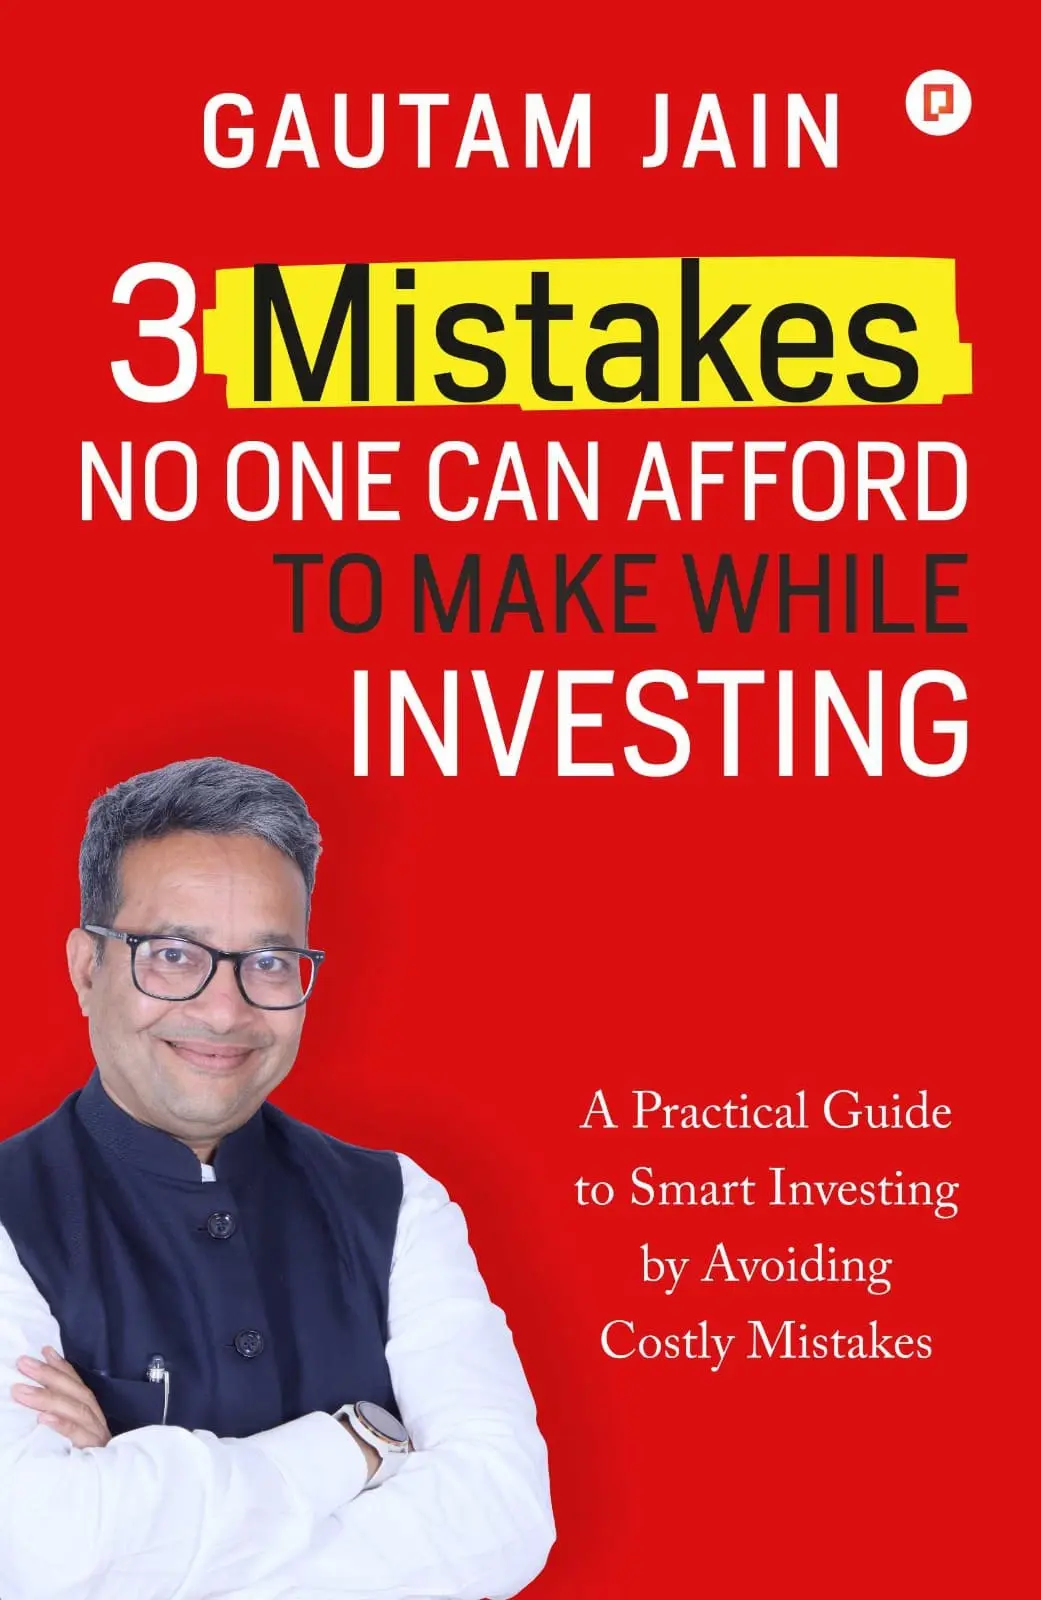 3 Mistakes That No One can Afford To Make While Investing, best books for Business Development